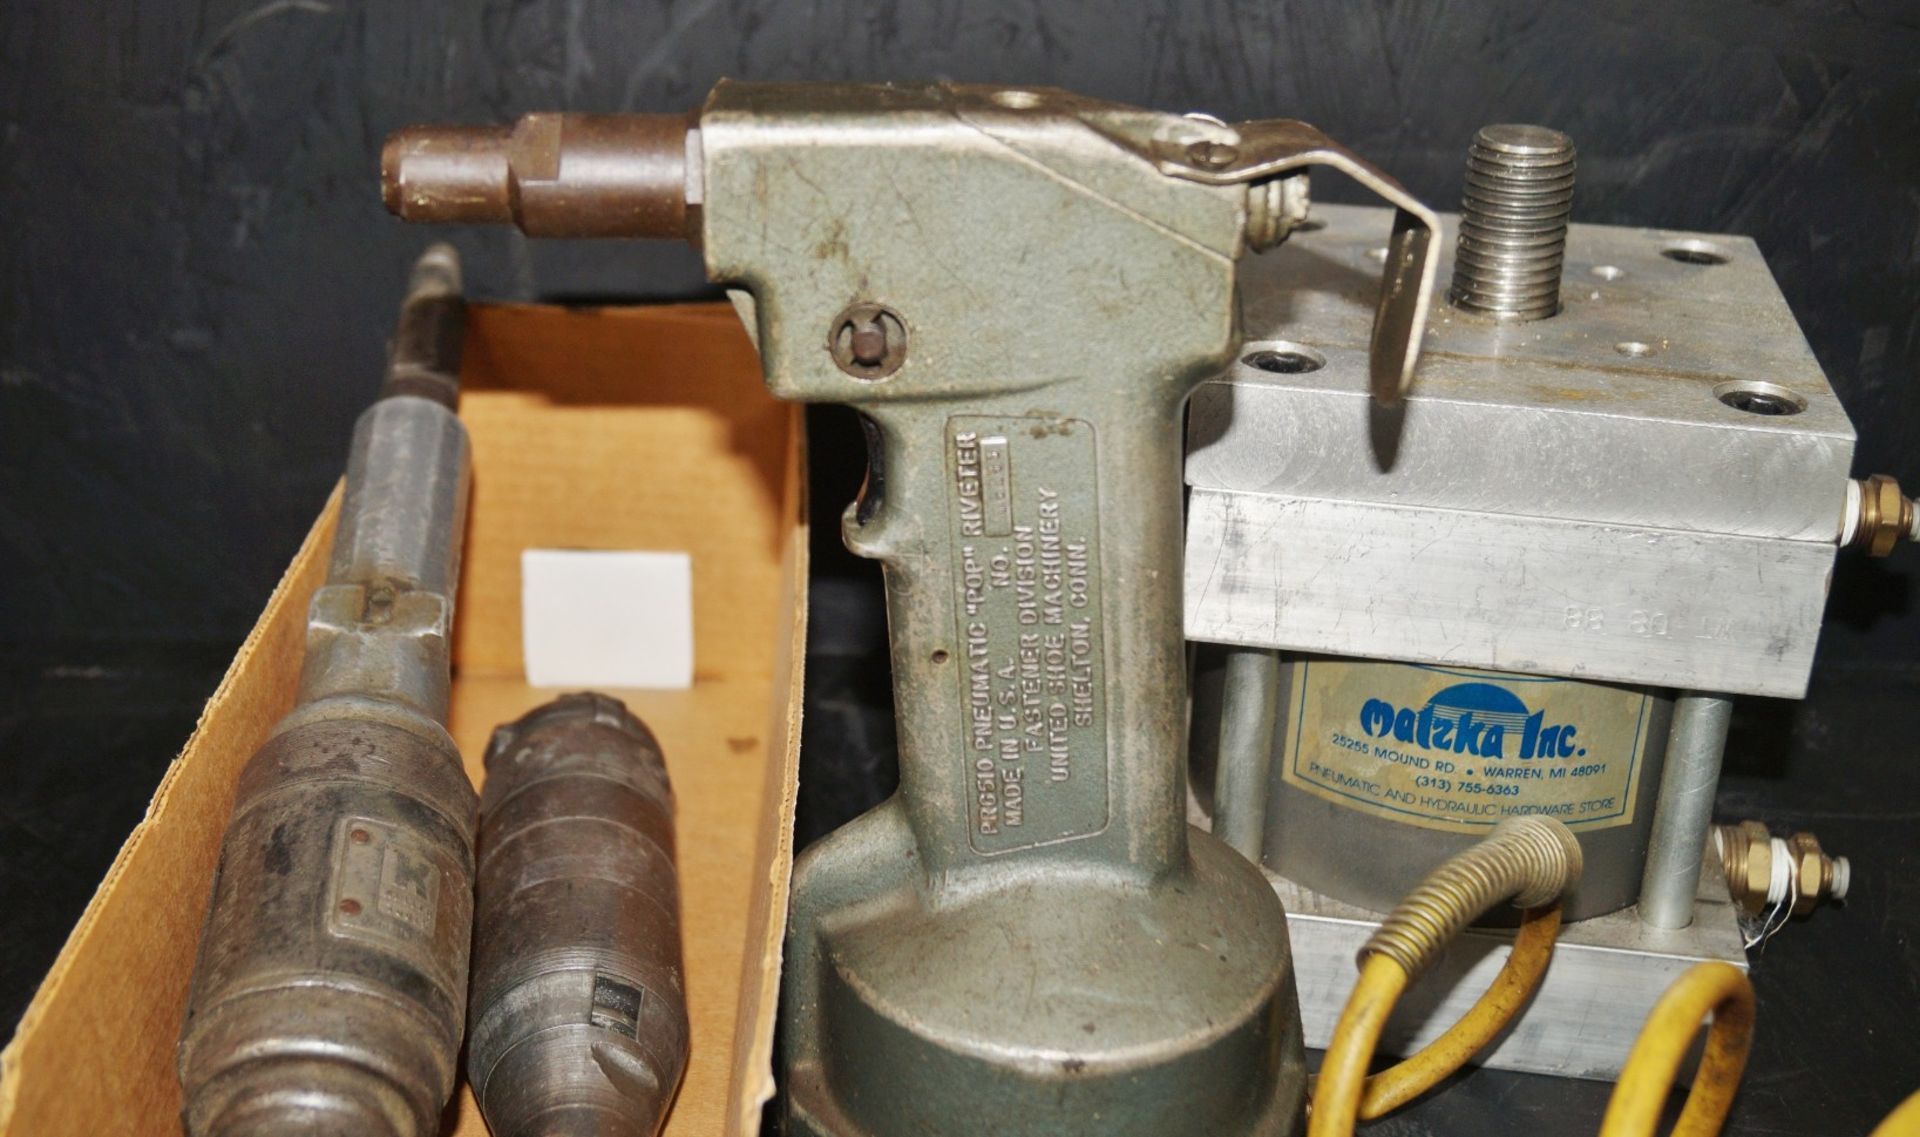 AIR TOOLS, ANGLE GRINDER & ETC. - Image 2 of 3